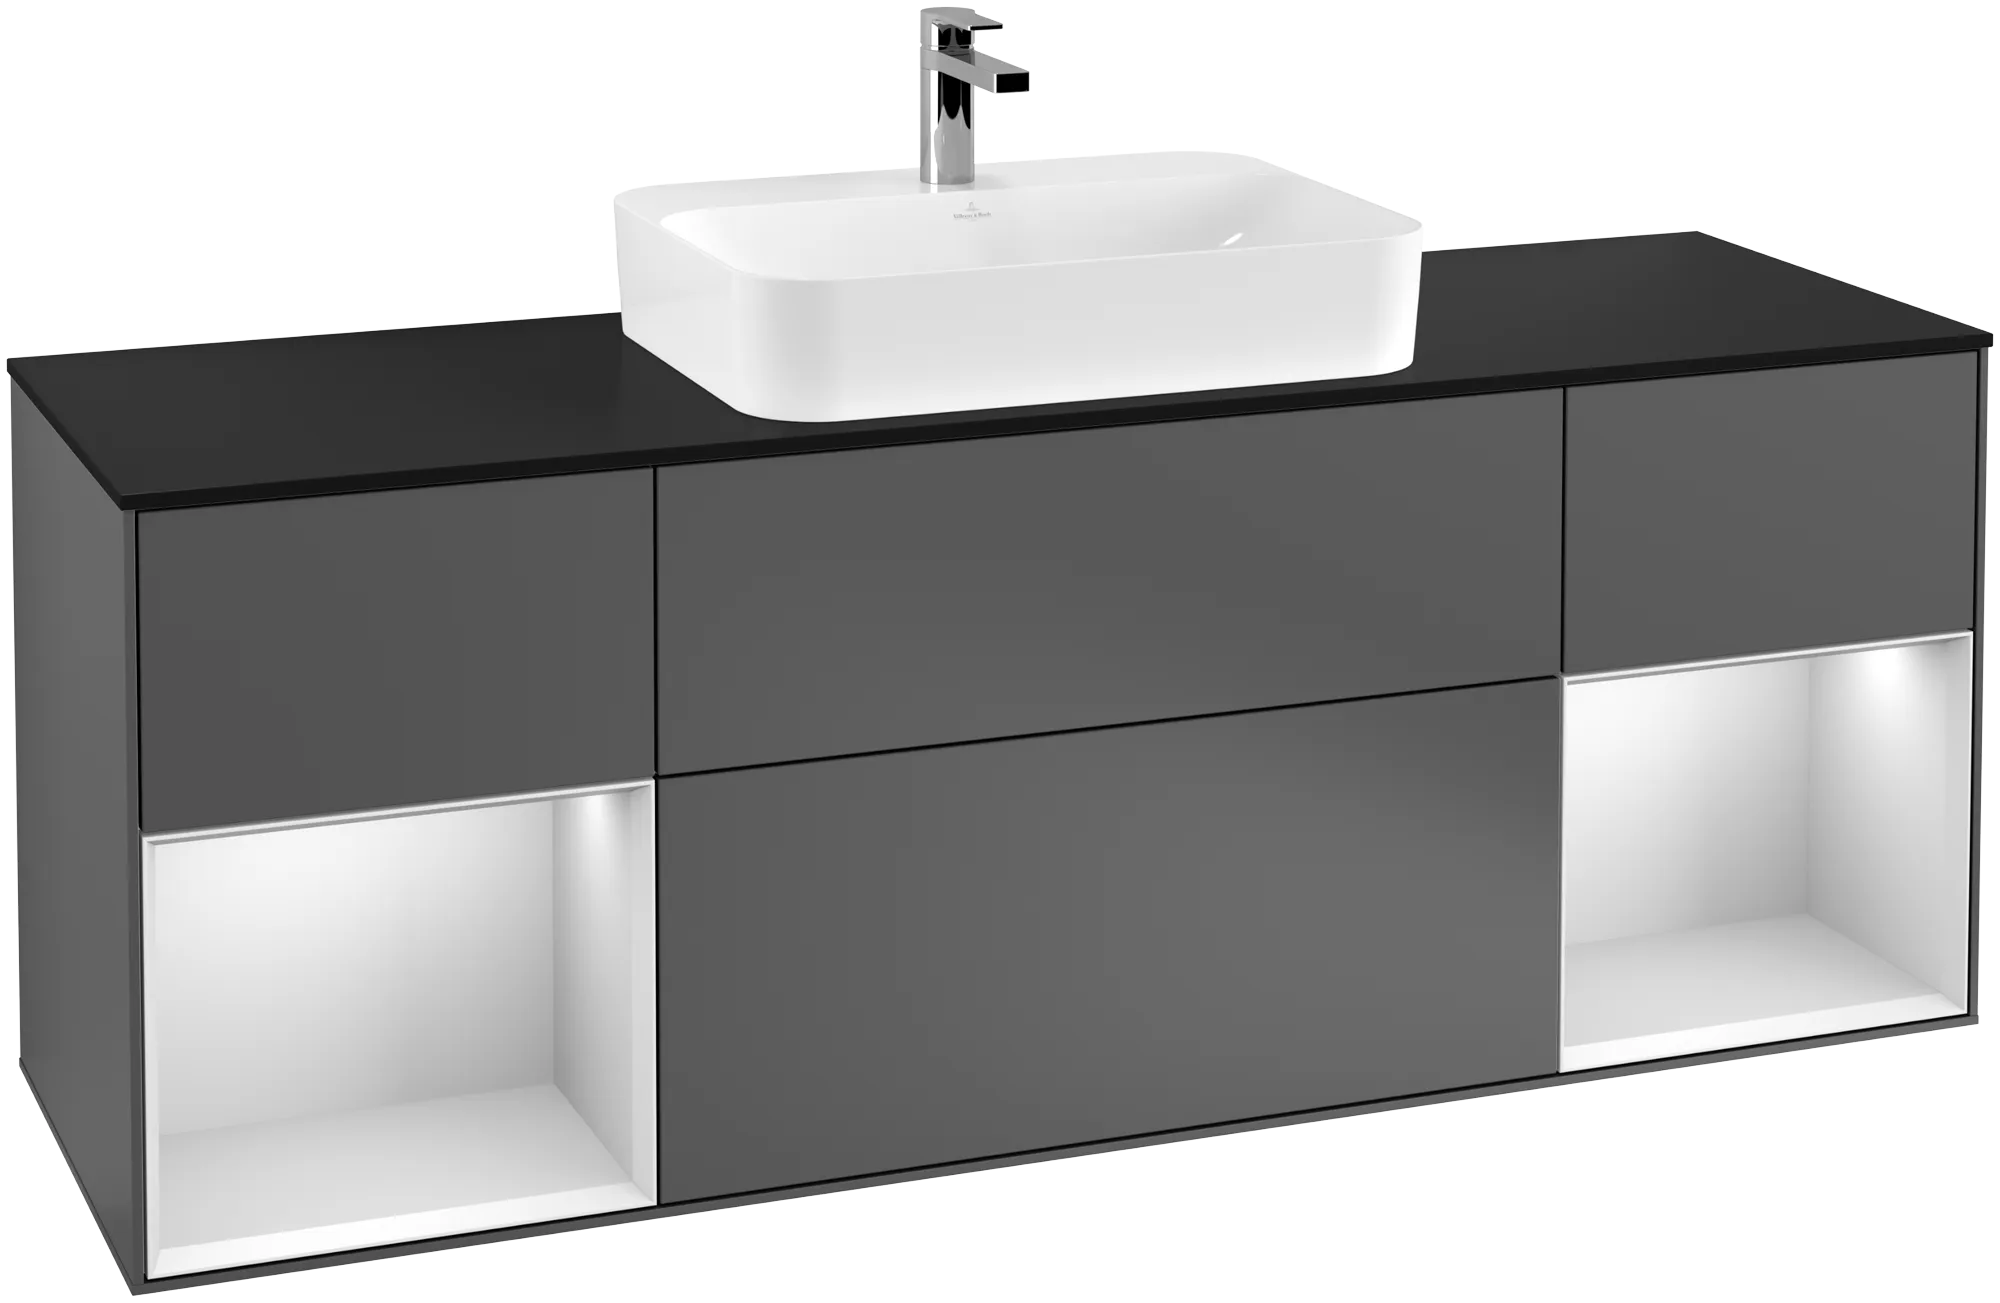 Picture of VILLEROY BOCH Finion Vanity unit, with lighting, 4 pull-out compartments, 1600 x 603 x 501 mm, Anthracite Matt Lacquer / White Matt Lacquer / Glass Black Matt #G452MTGK